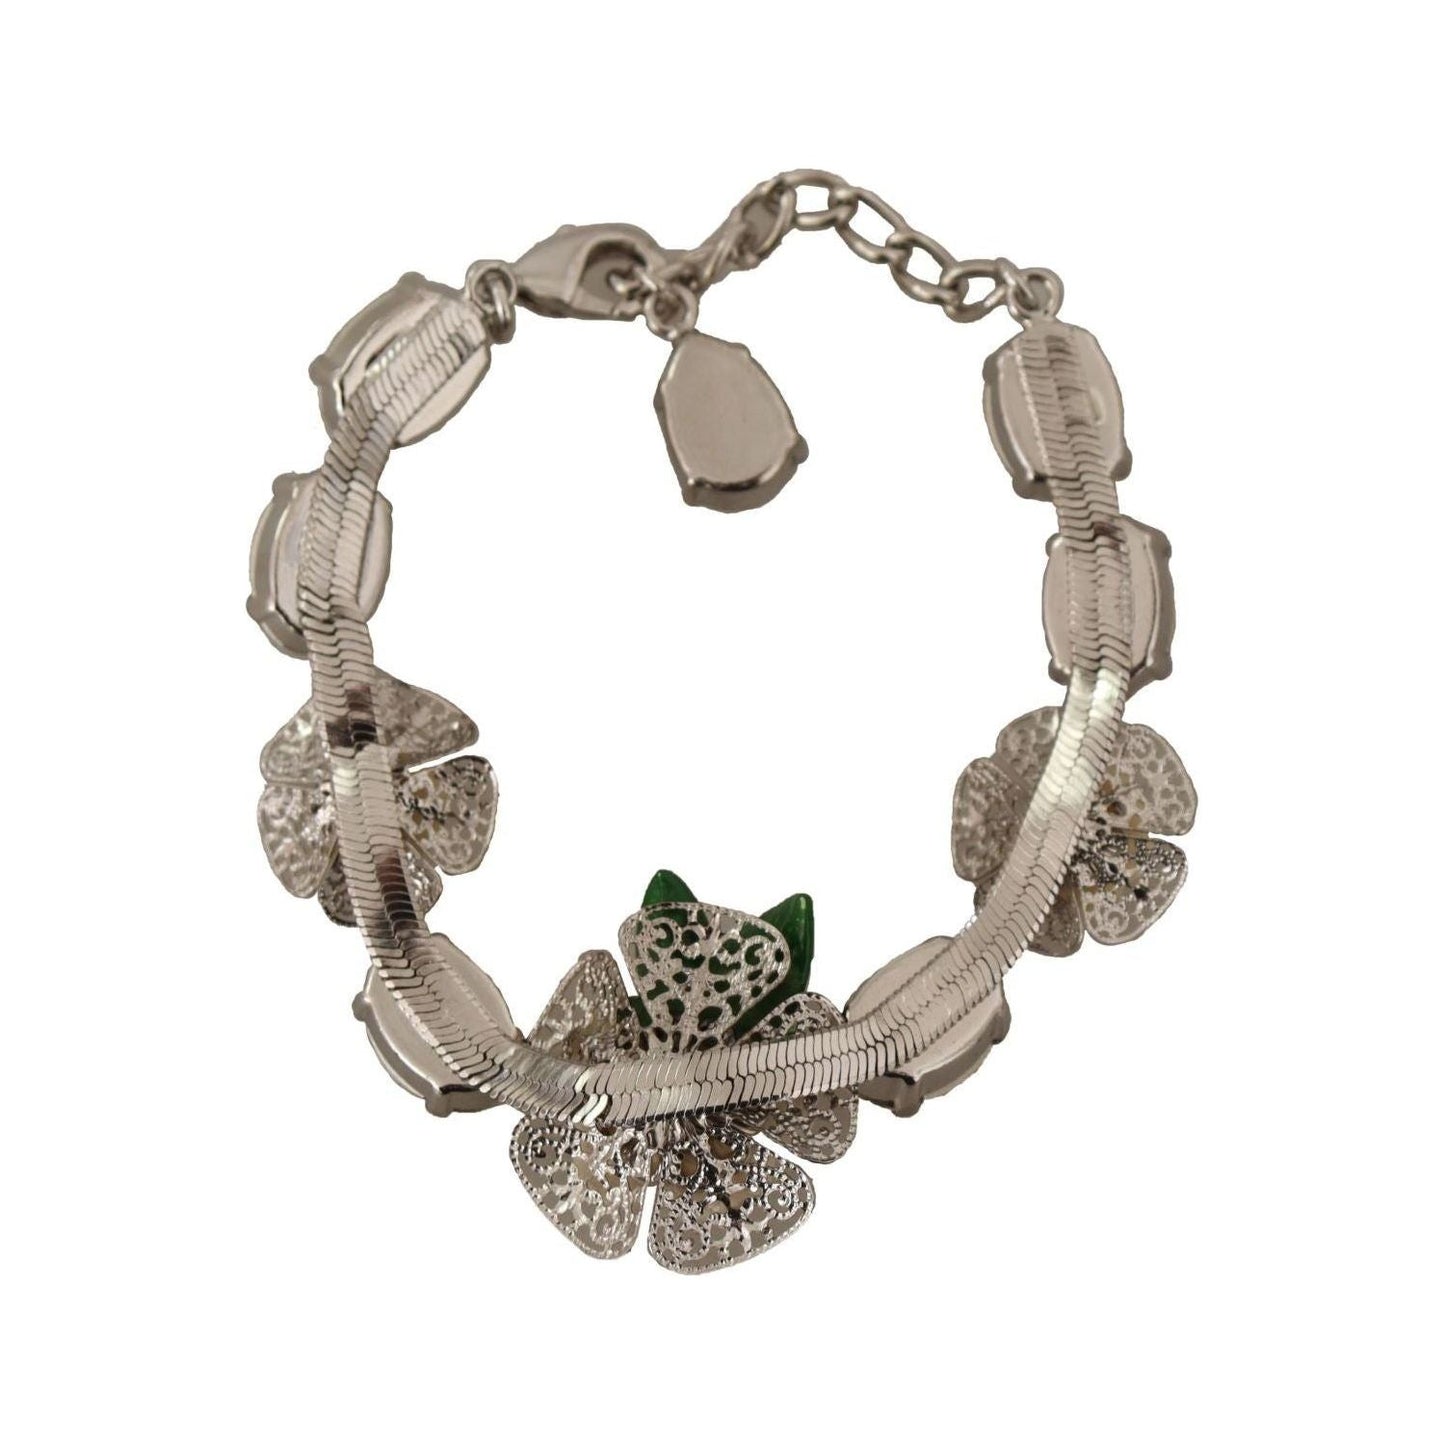 Dolce & Gabbana Elegant Silver Chain Bracelet with Charms & Crystals silver-brass-chain-clear-crystal-floral-bracelet IMG_8740-scaled-0aab4dee-4e9.jpg